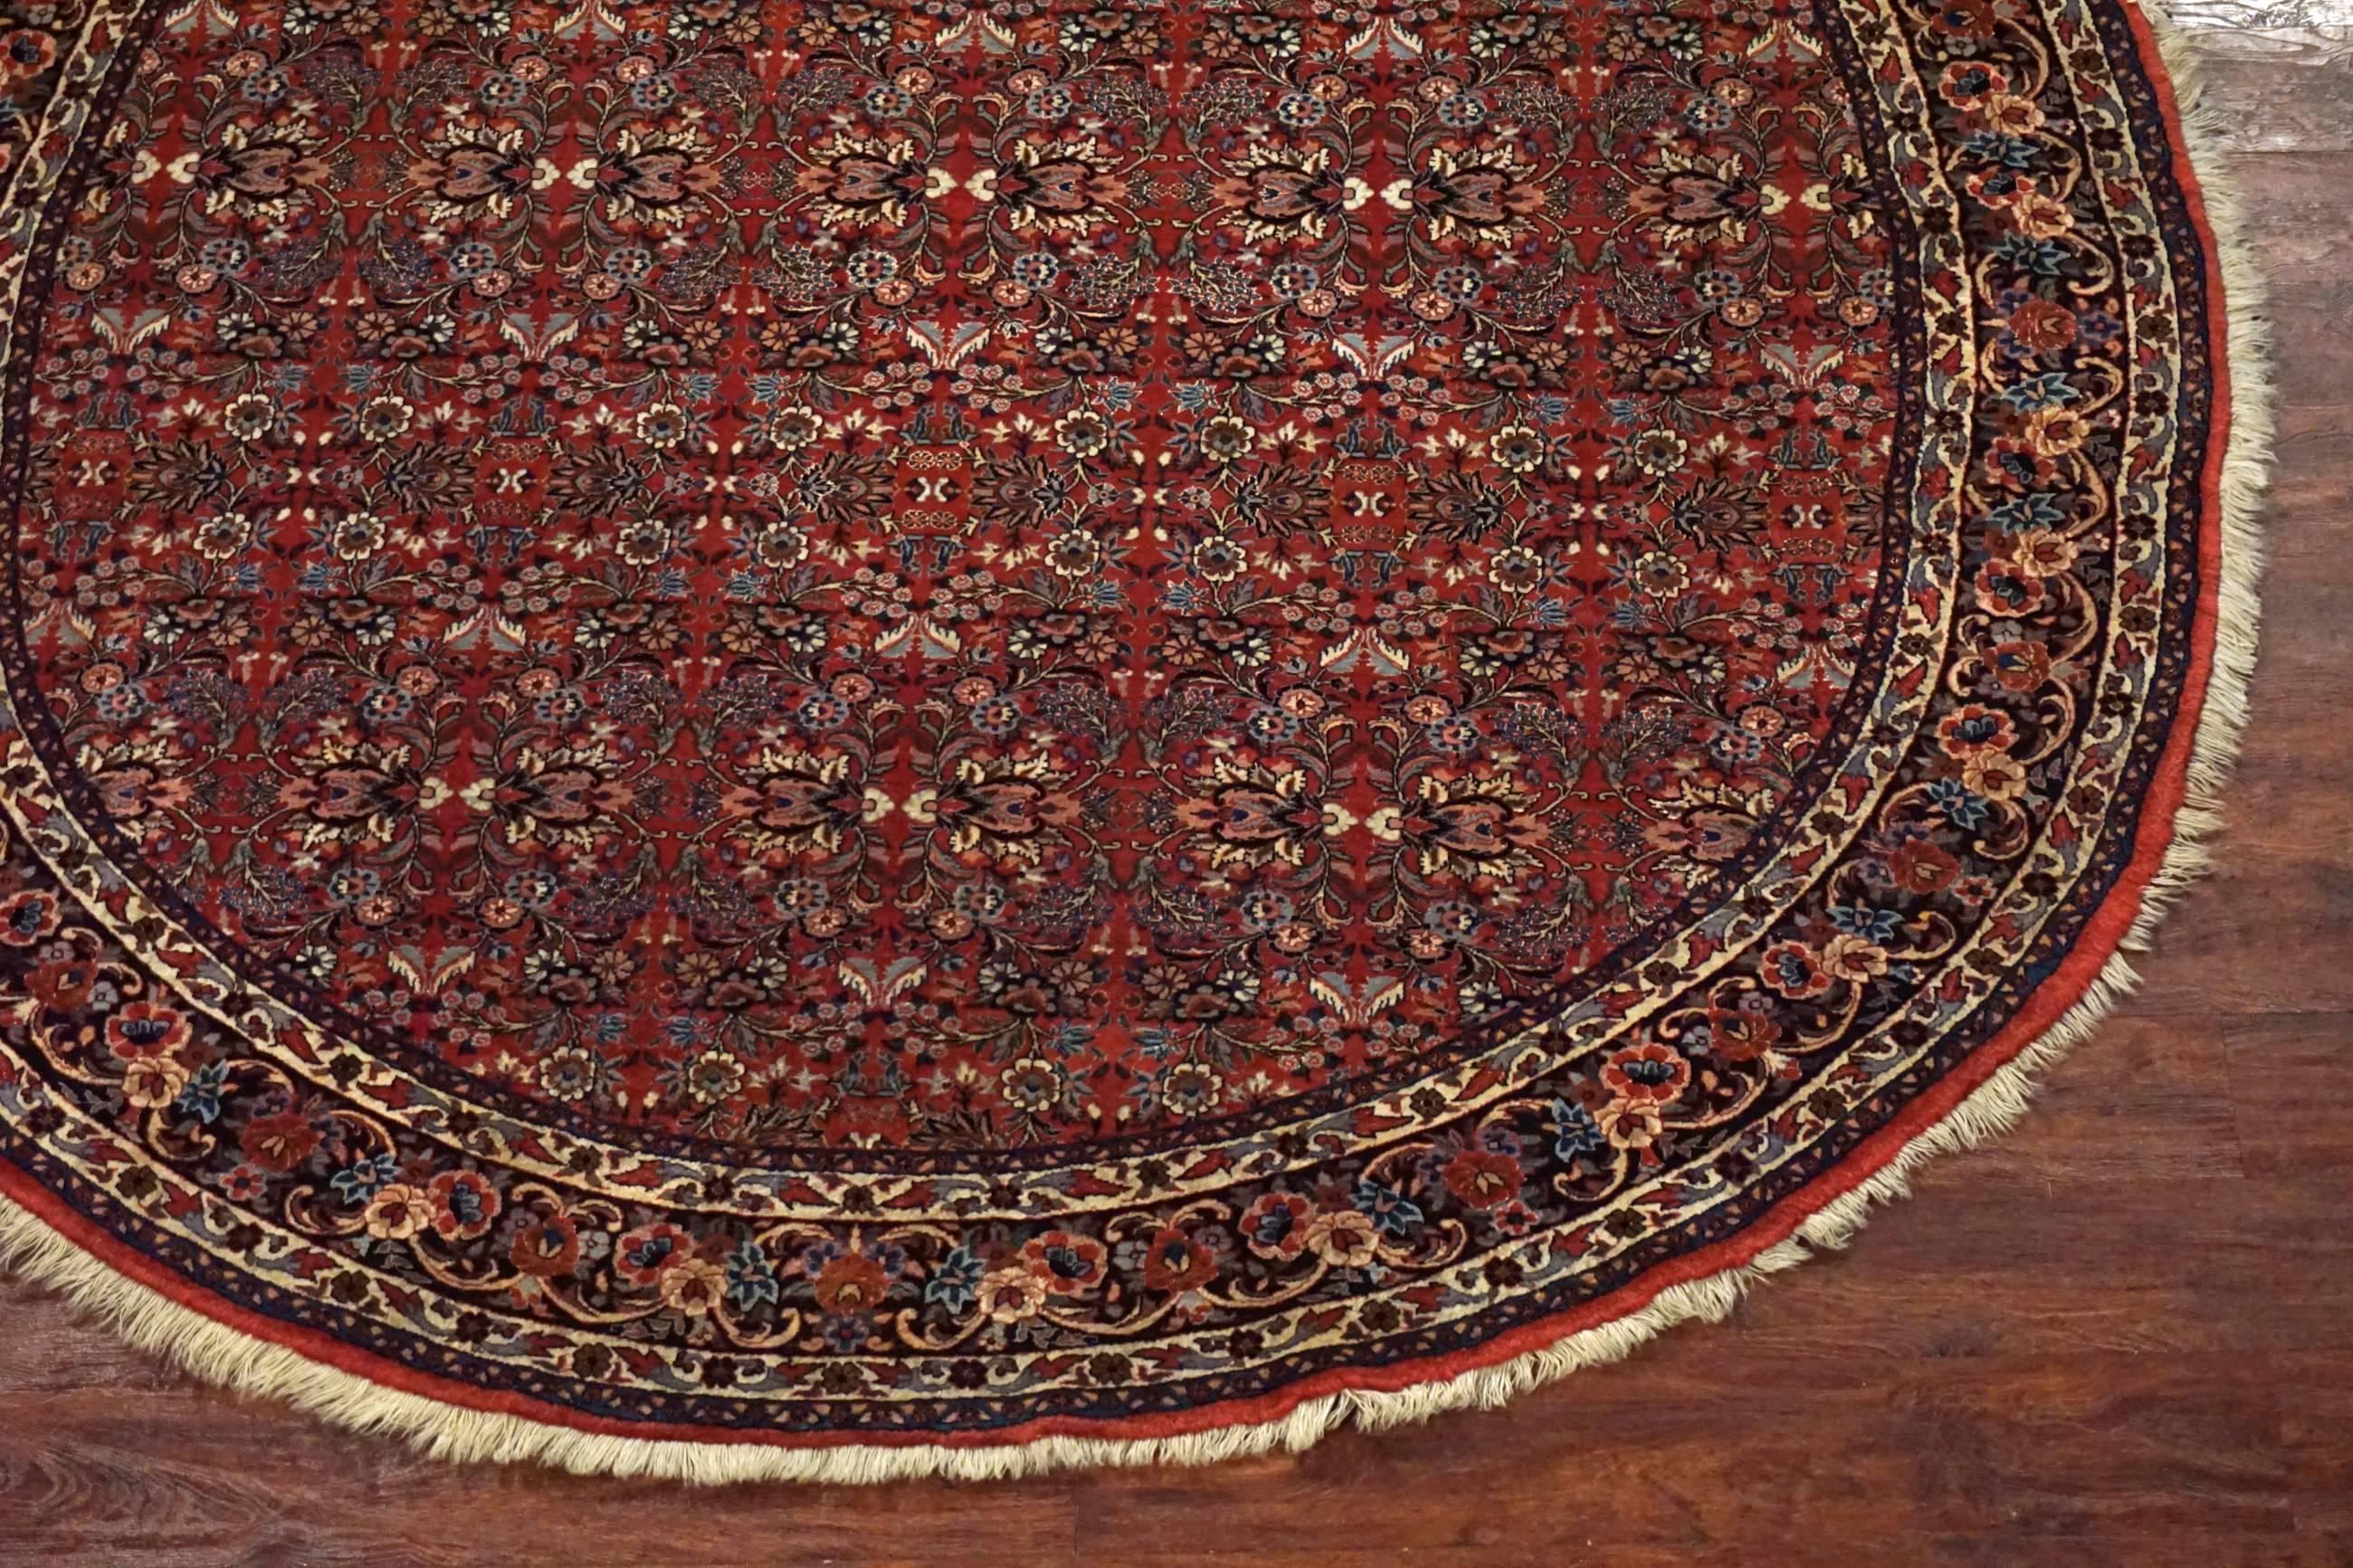 Fine Round Persian Bidjar Area Rug, Hand-Knotted Wool and Silk In Good Condition For Sale In Northridge, CA